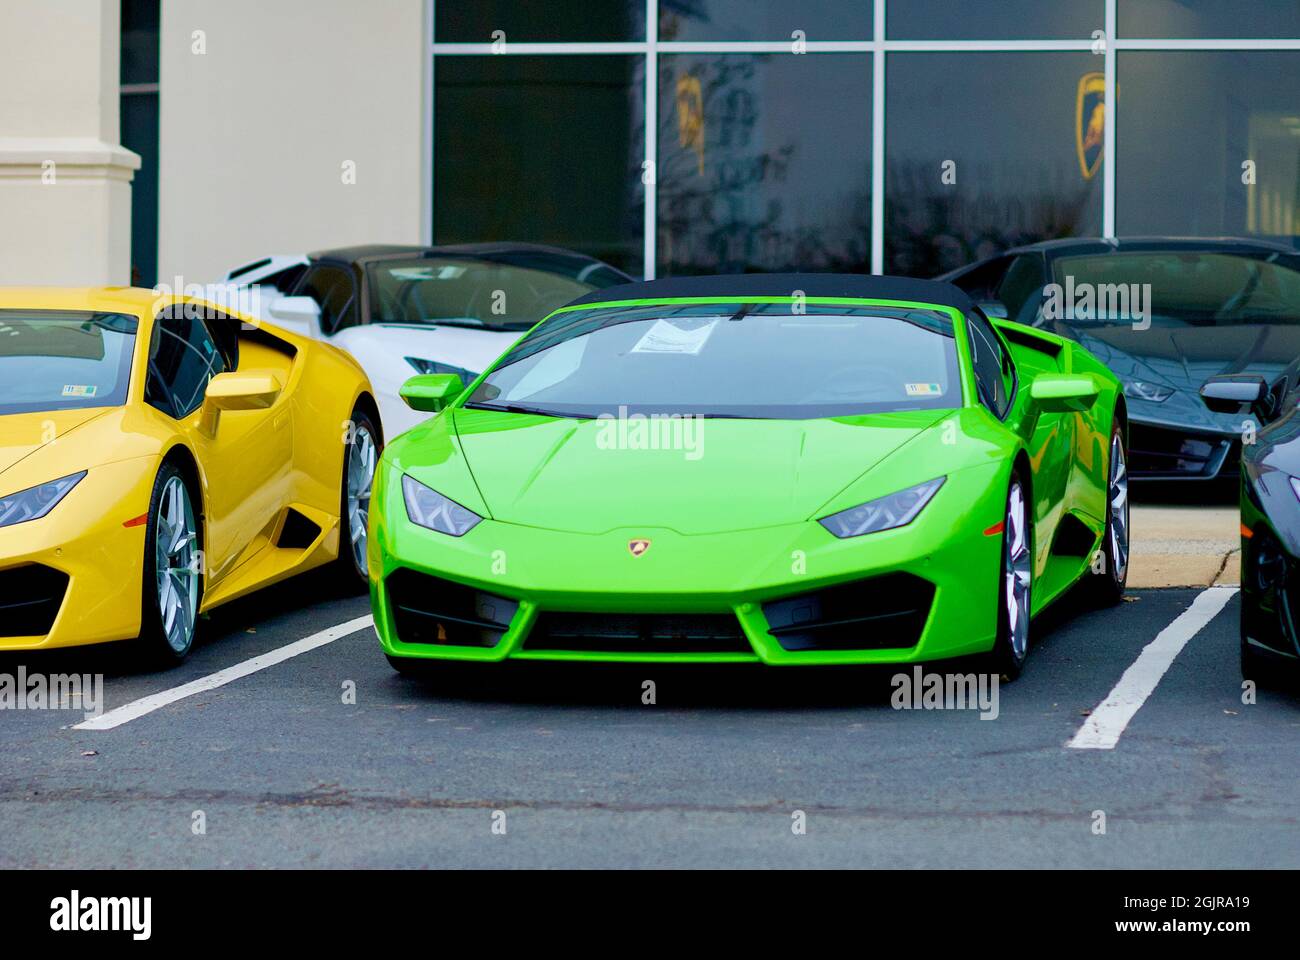 Sterling, Virginia, USA - December 9, 2018: Green and yellow Lamborghini luxury sports cars for sale at the Lamborghini Sterling car dealership. Stock Photo